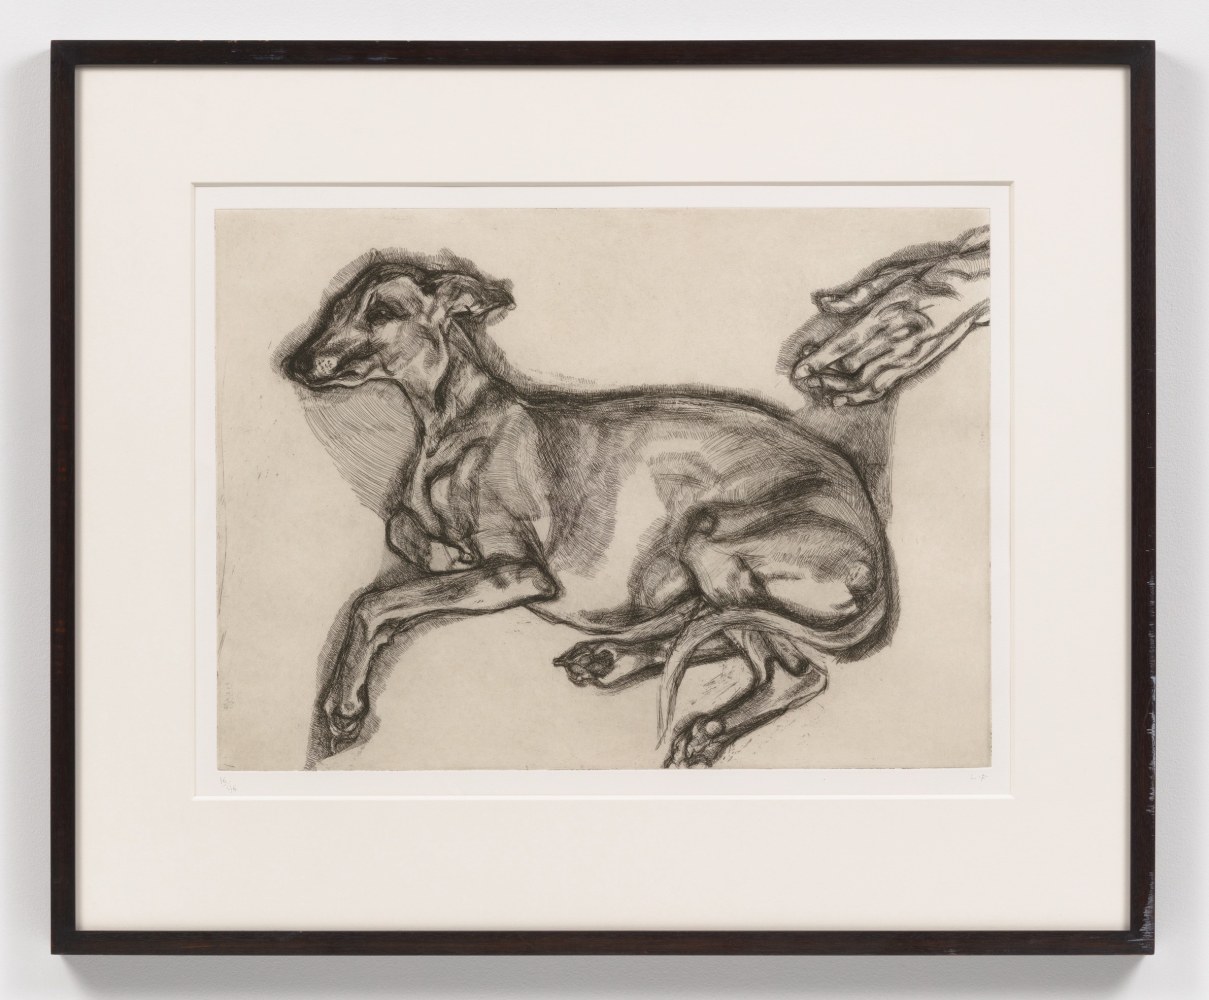 A Lucian Freud etching depicting a dog and human hand on cream paper